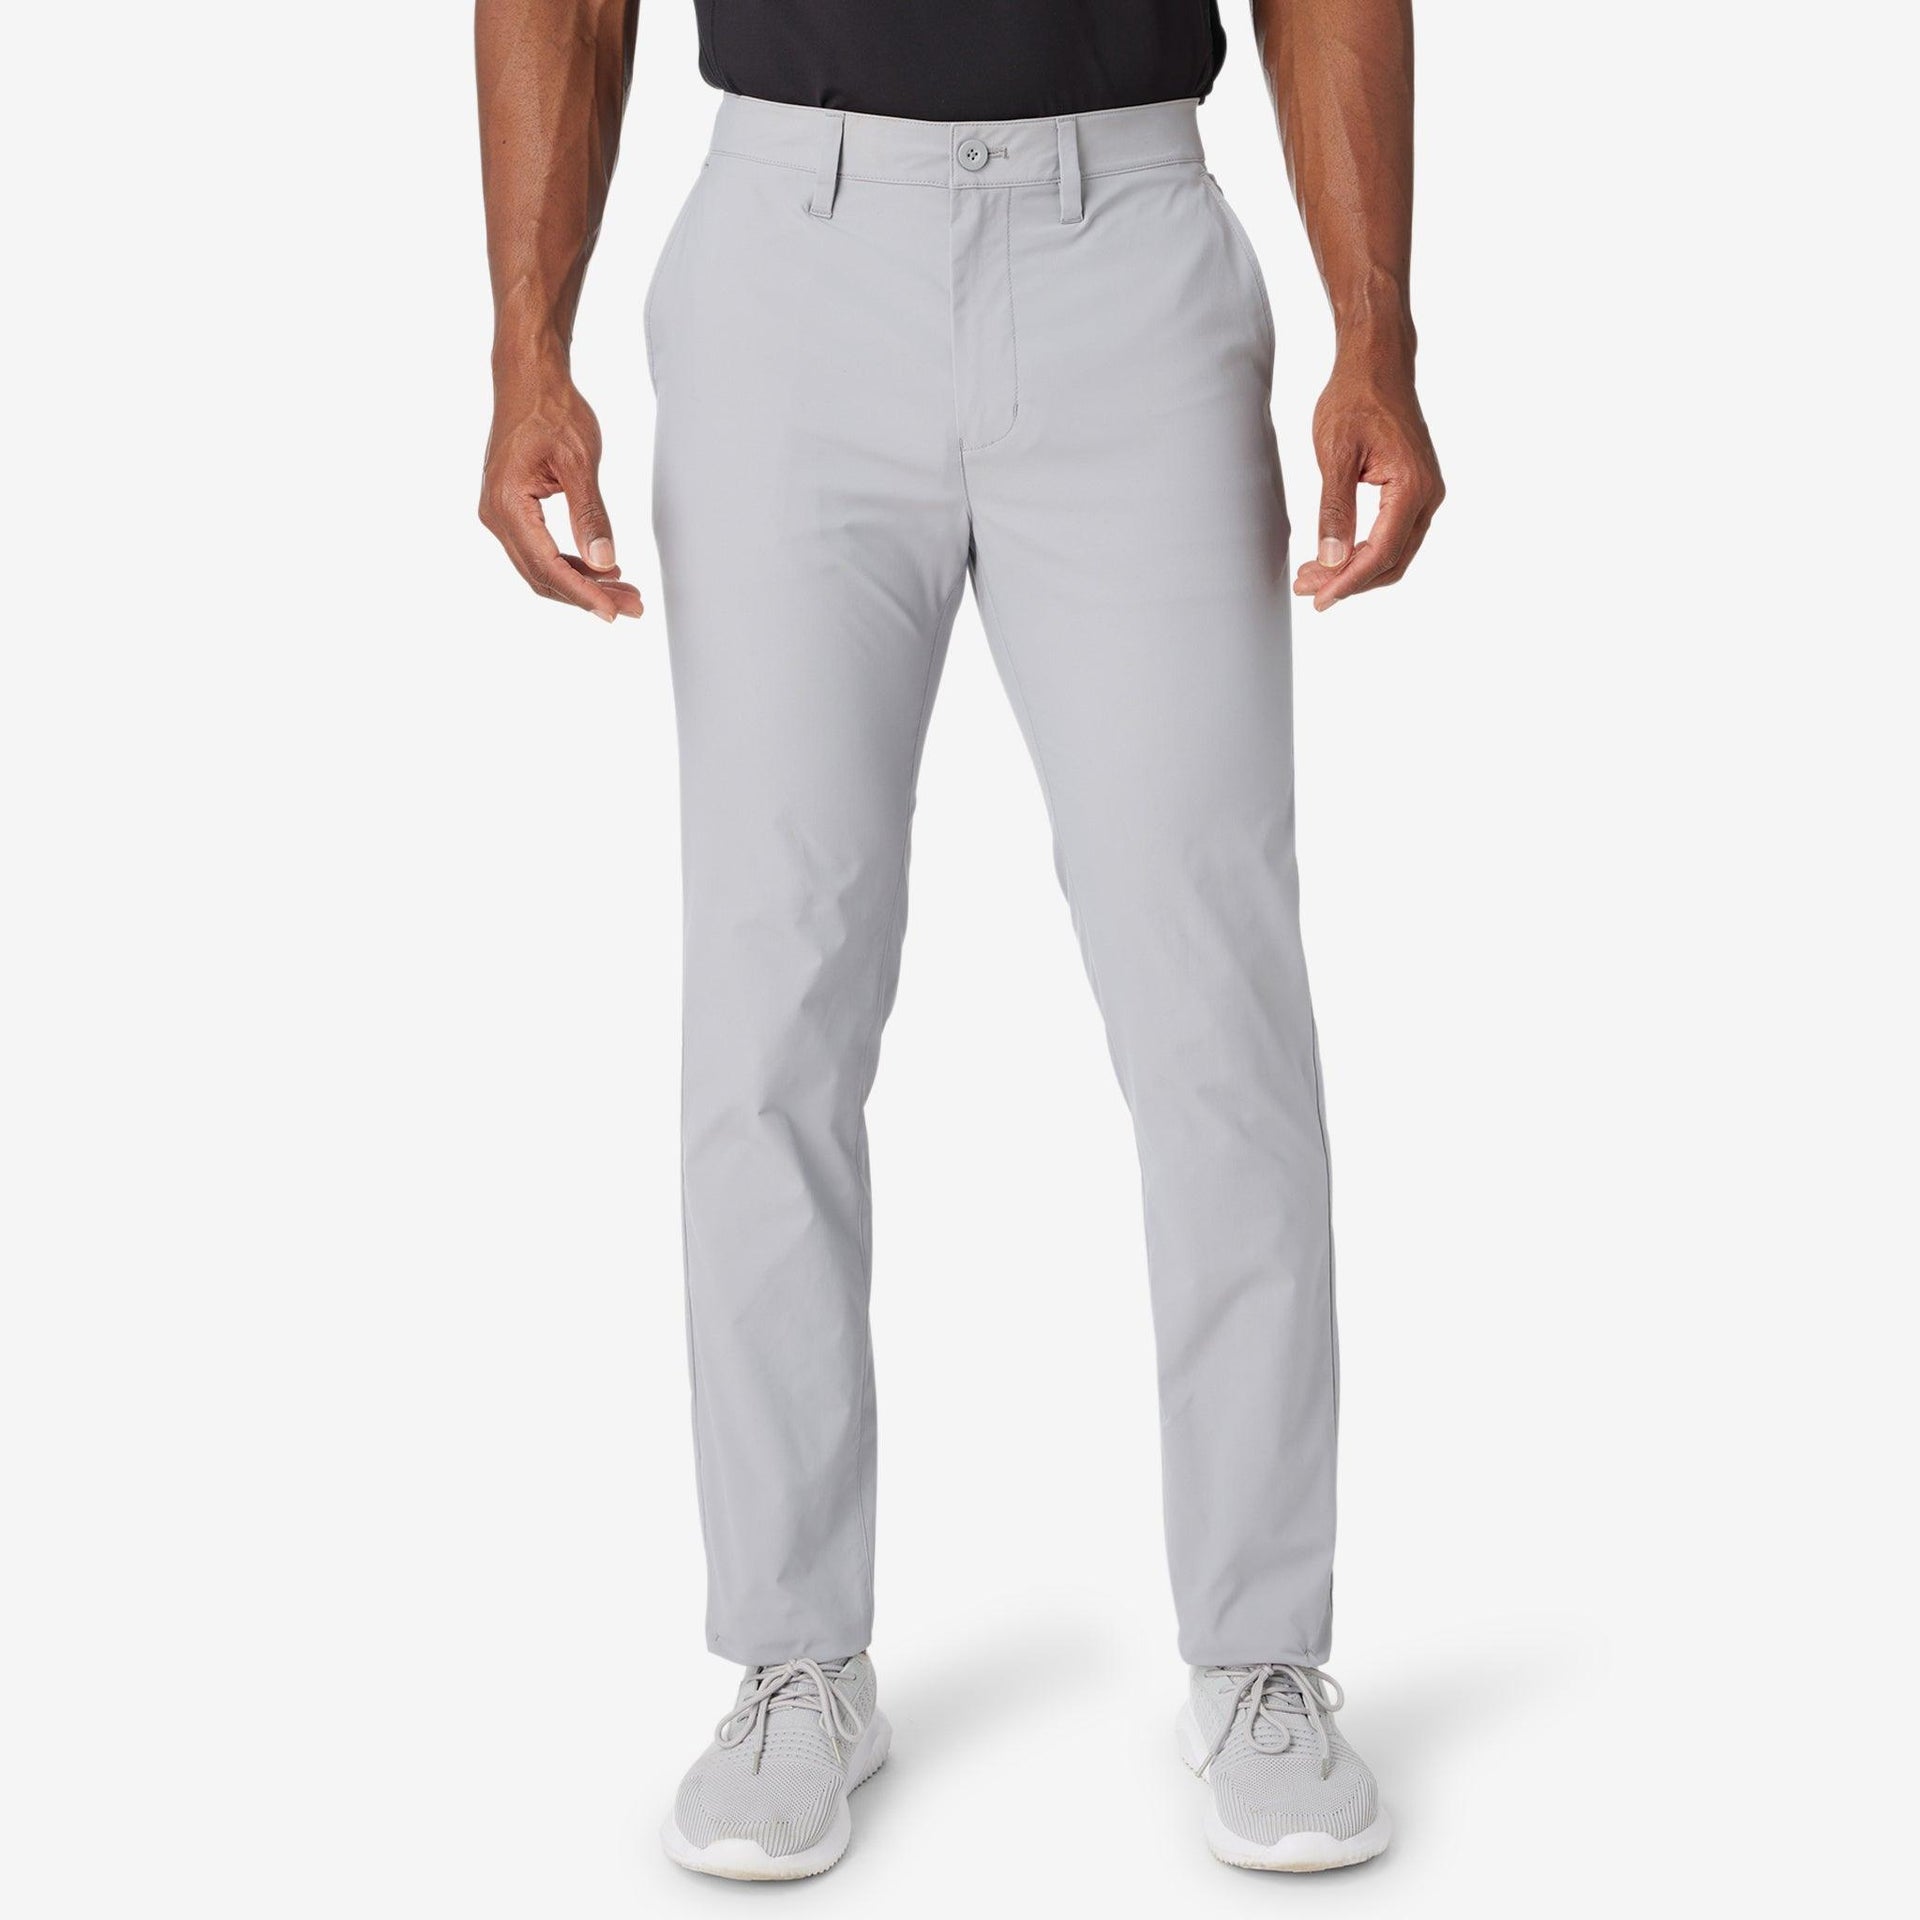 clubhouse pant Gray 32x30